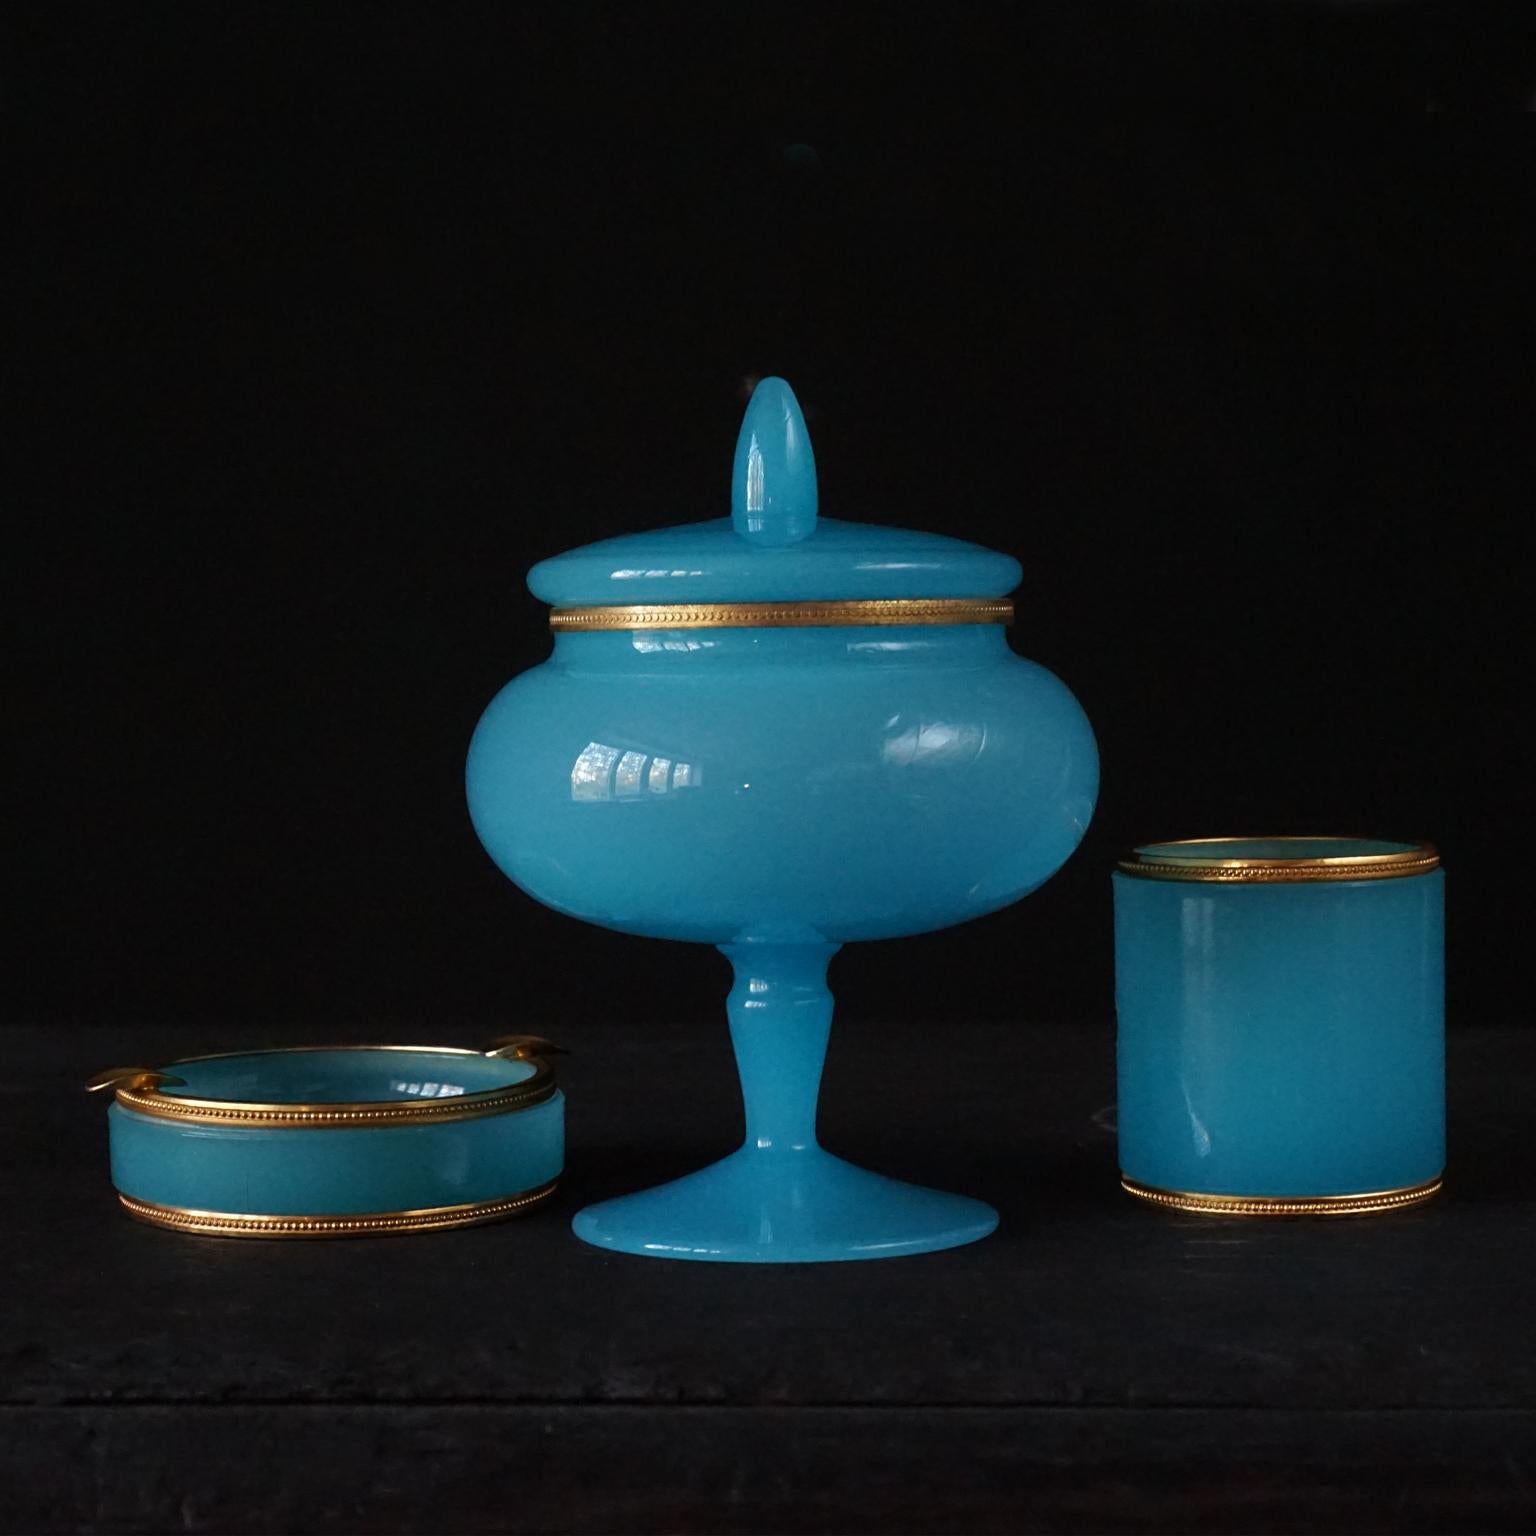 1950s set of three blue opaline glass items. Made in Italy 
The bright blue milk, opaline or cased glass is heavy and thick, all items have a decorative ormolu brass mount or rim

The set consists of an ashtray a small jar, probably for holding